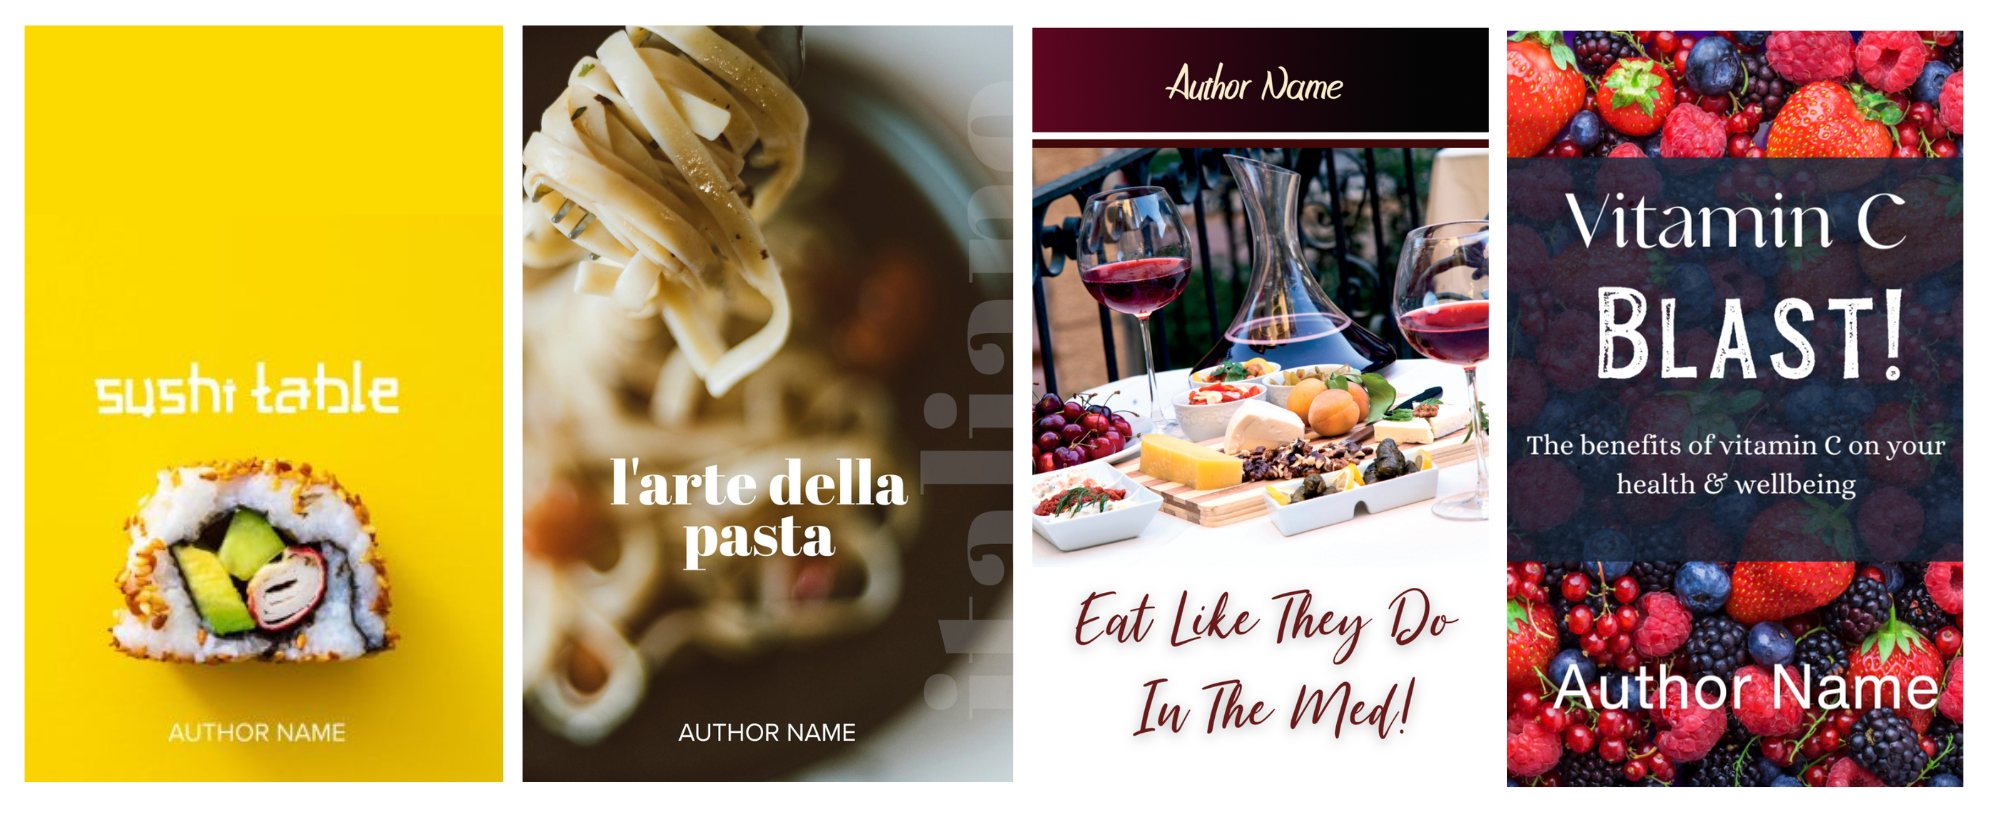 A collage of four book covers. The first cover, titled "sushi table," shows a sushi roll on a bright yellow background. The second, "l'arte della pasta," has close-up pasta on a fork. The third, "Eat Like They Do In The Med!" features a table with Mediterranean food and wine. The fourth, "Vitamin C BLAST!" showcases an assortment of fruits, emphasizing health and wellness. All covers have "AUTHOR NAME" placeholders at the bottom. BookSelf Book Cover Design & Premade Book Covers